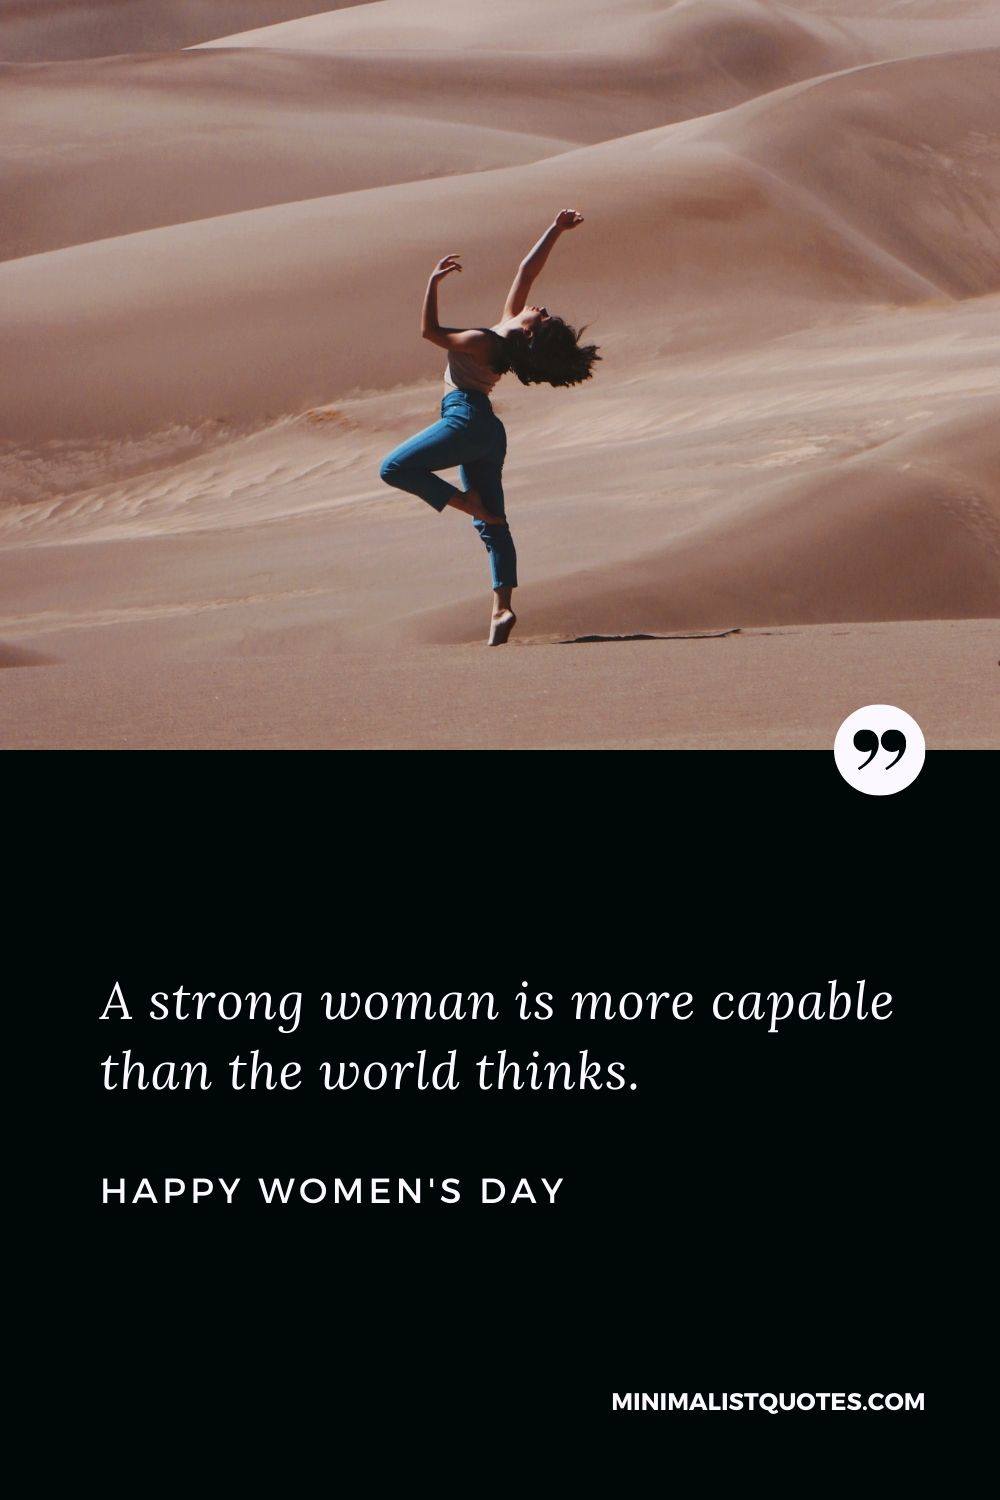 Women's Day Wish: A strong woman is more capable than the world thinks.